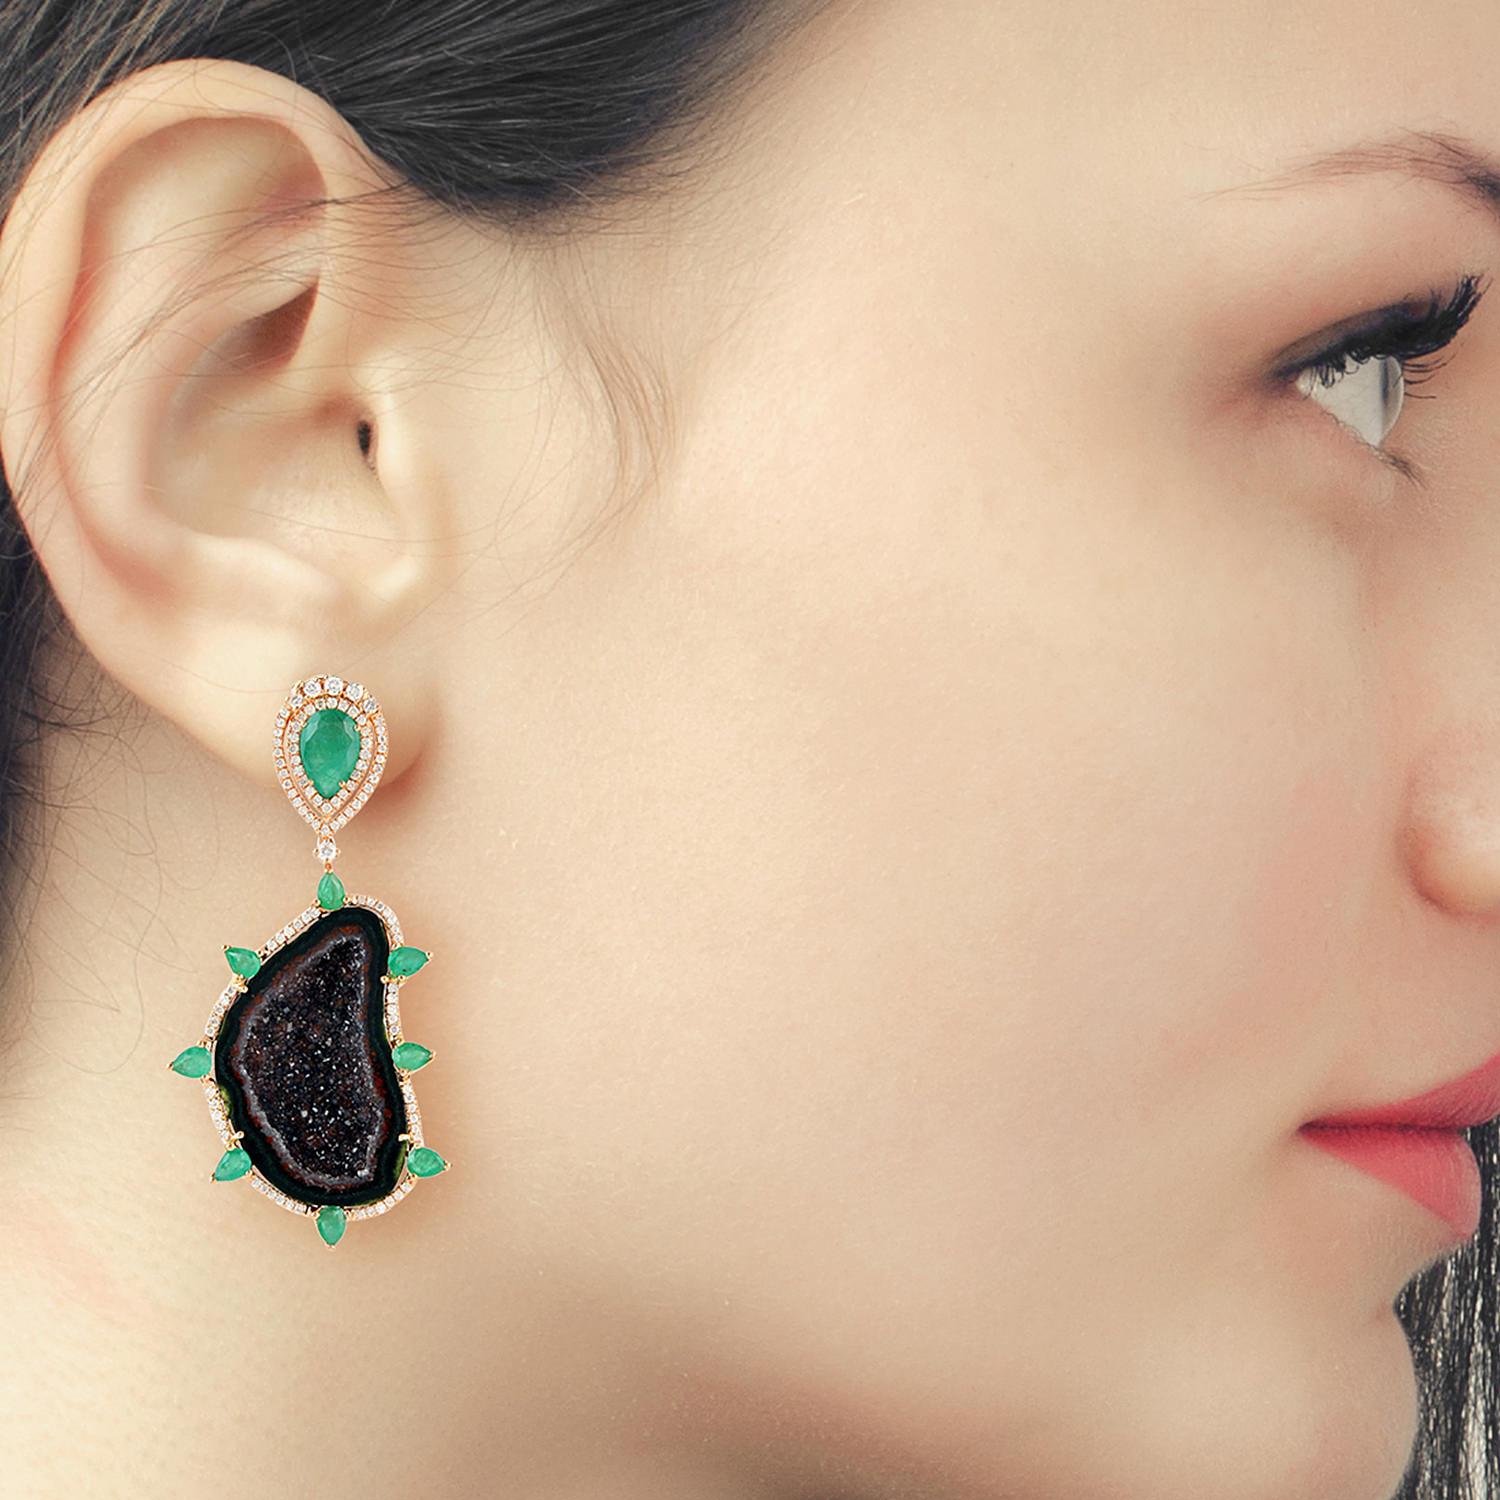 A stunning earrings handmade in 18K gold.  It is set in natural geodes, 4.62 carats emerald and 1.18 carats diamonds. 

FOLLOW  MEGHNA JEWELS storefront to view the latest collection & exclusive pieces.  Meghna Jewels is proudly rated as a Top